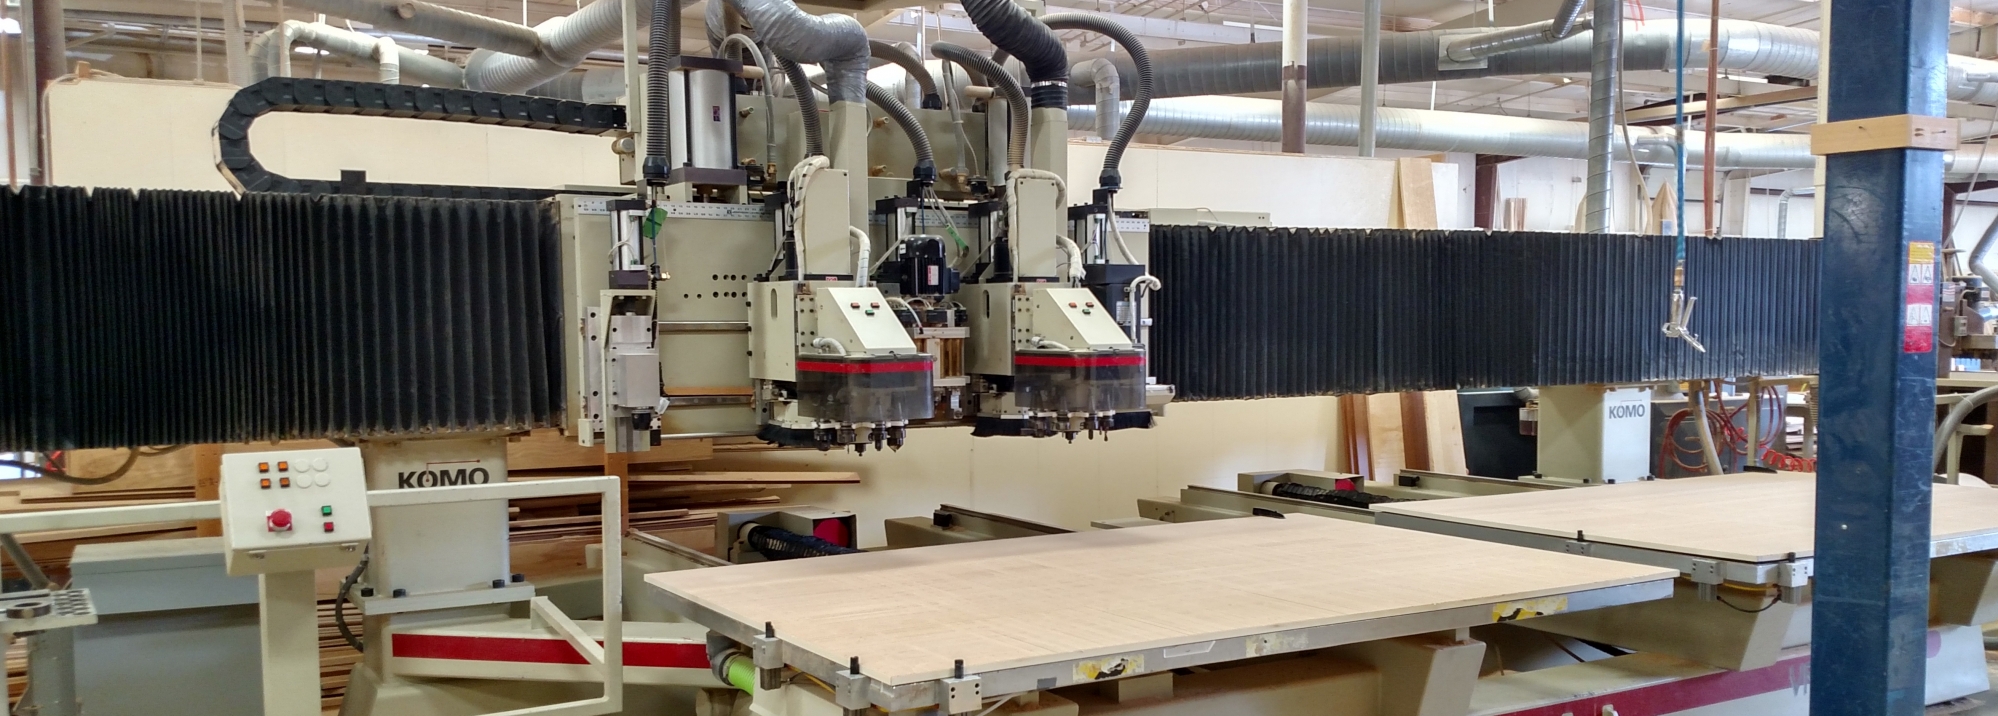 Cnc-wood-router Header Image